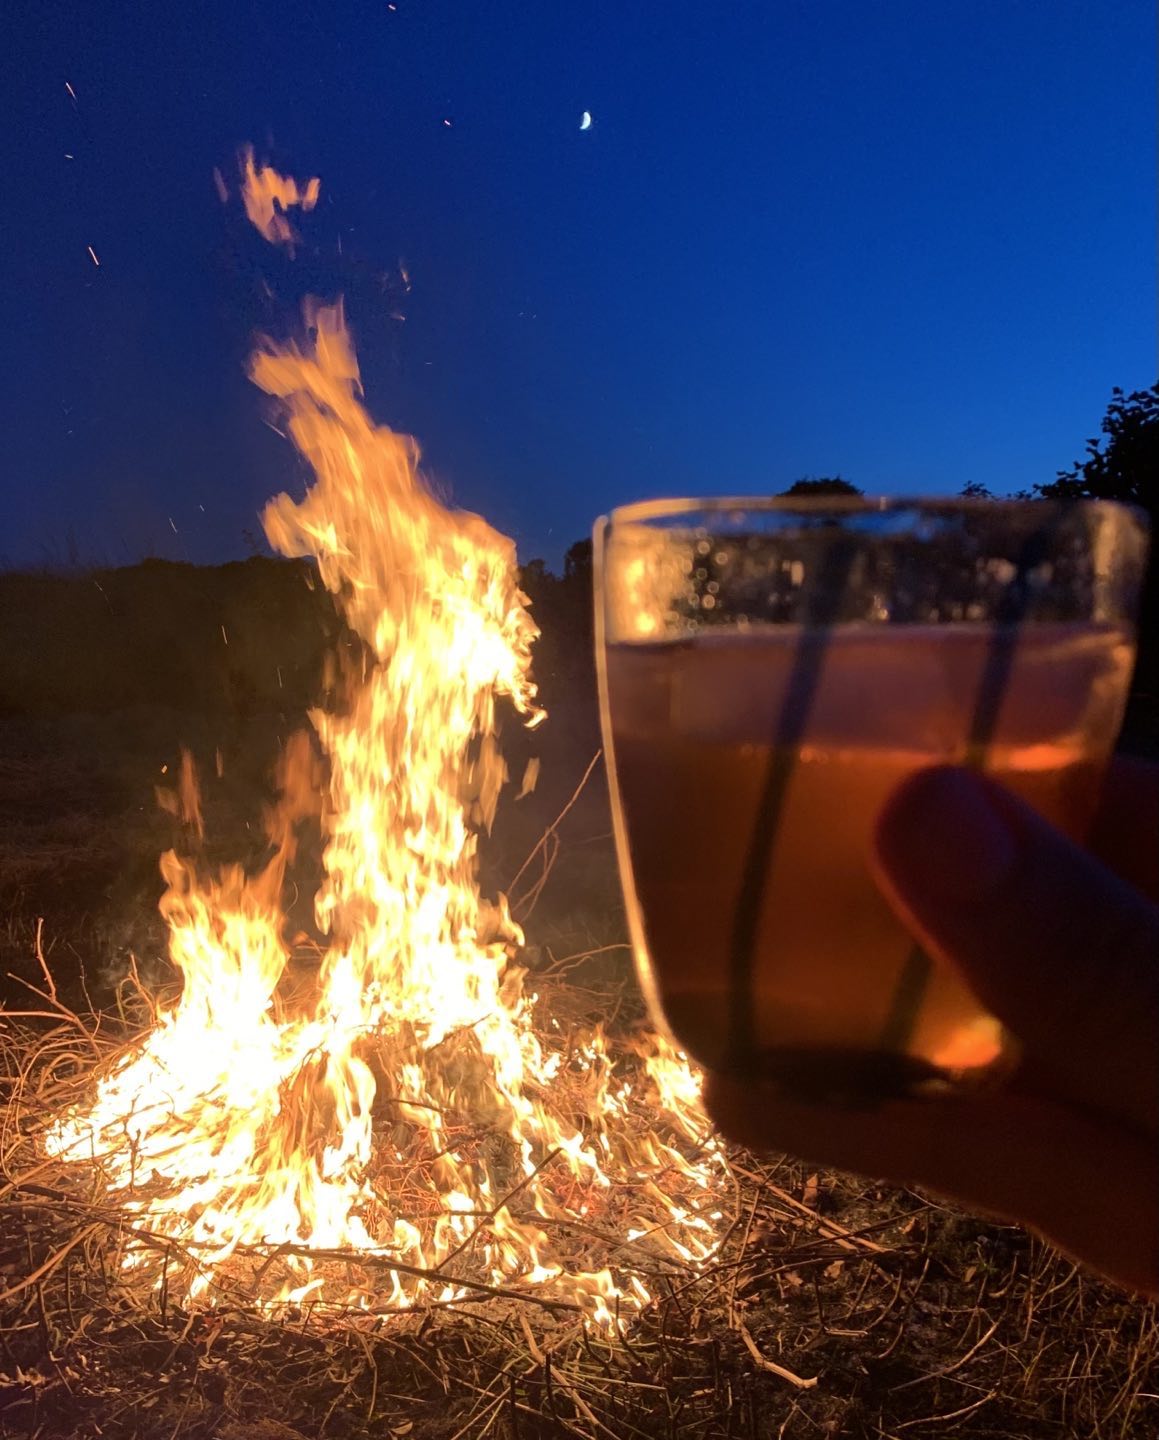 Last night’s belated solstice celebrations - flaming bramble and vine prunings beneath a crescent moon, toasted with a Gibson’s Organic Sloe gin n tonic #organic #sloegin #cotswolds #cocktails #druidpotions